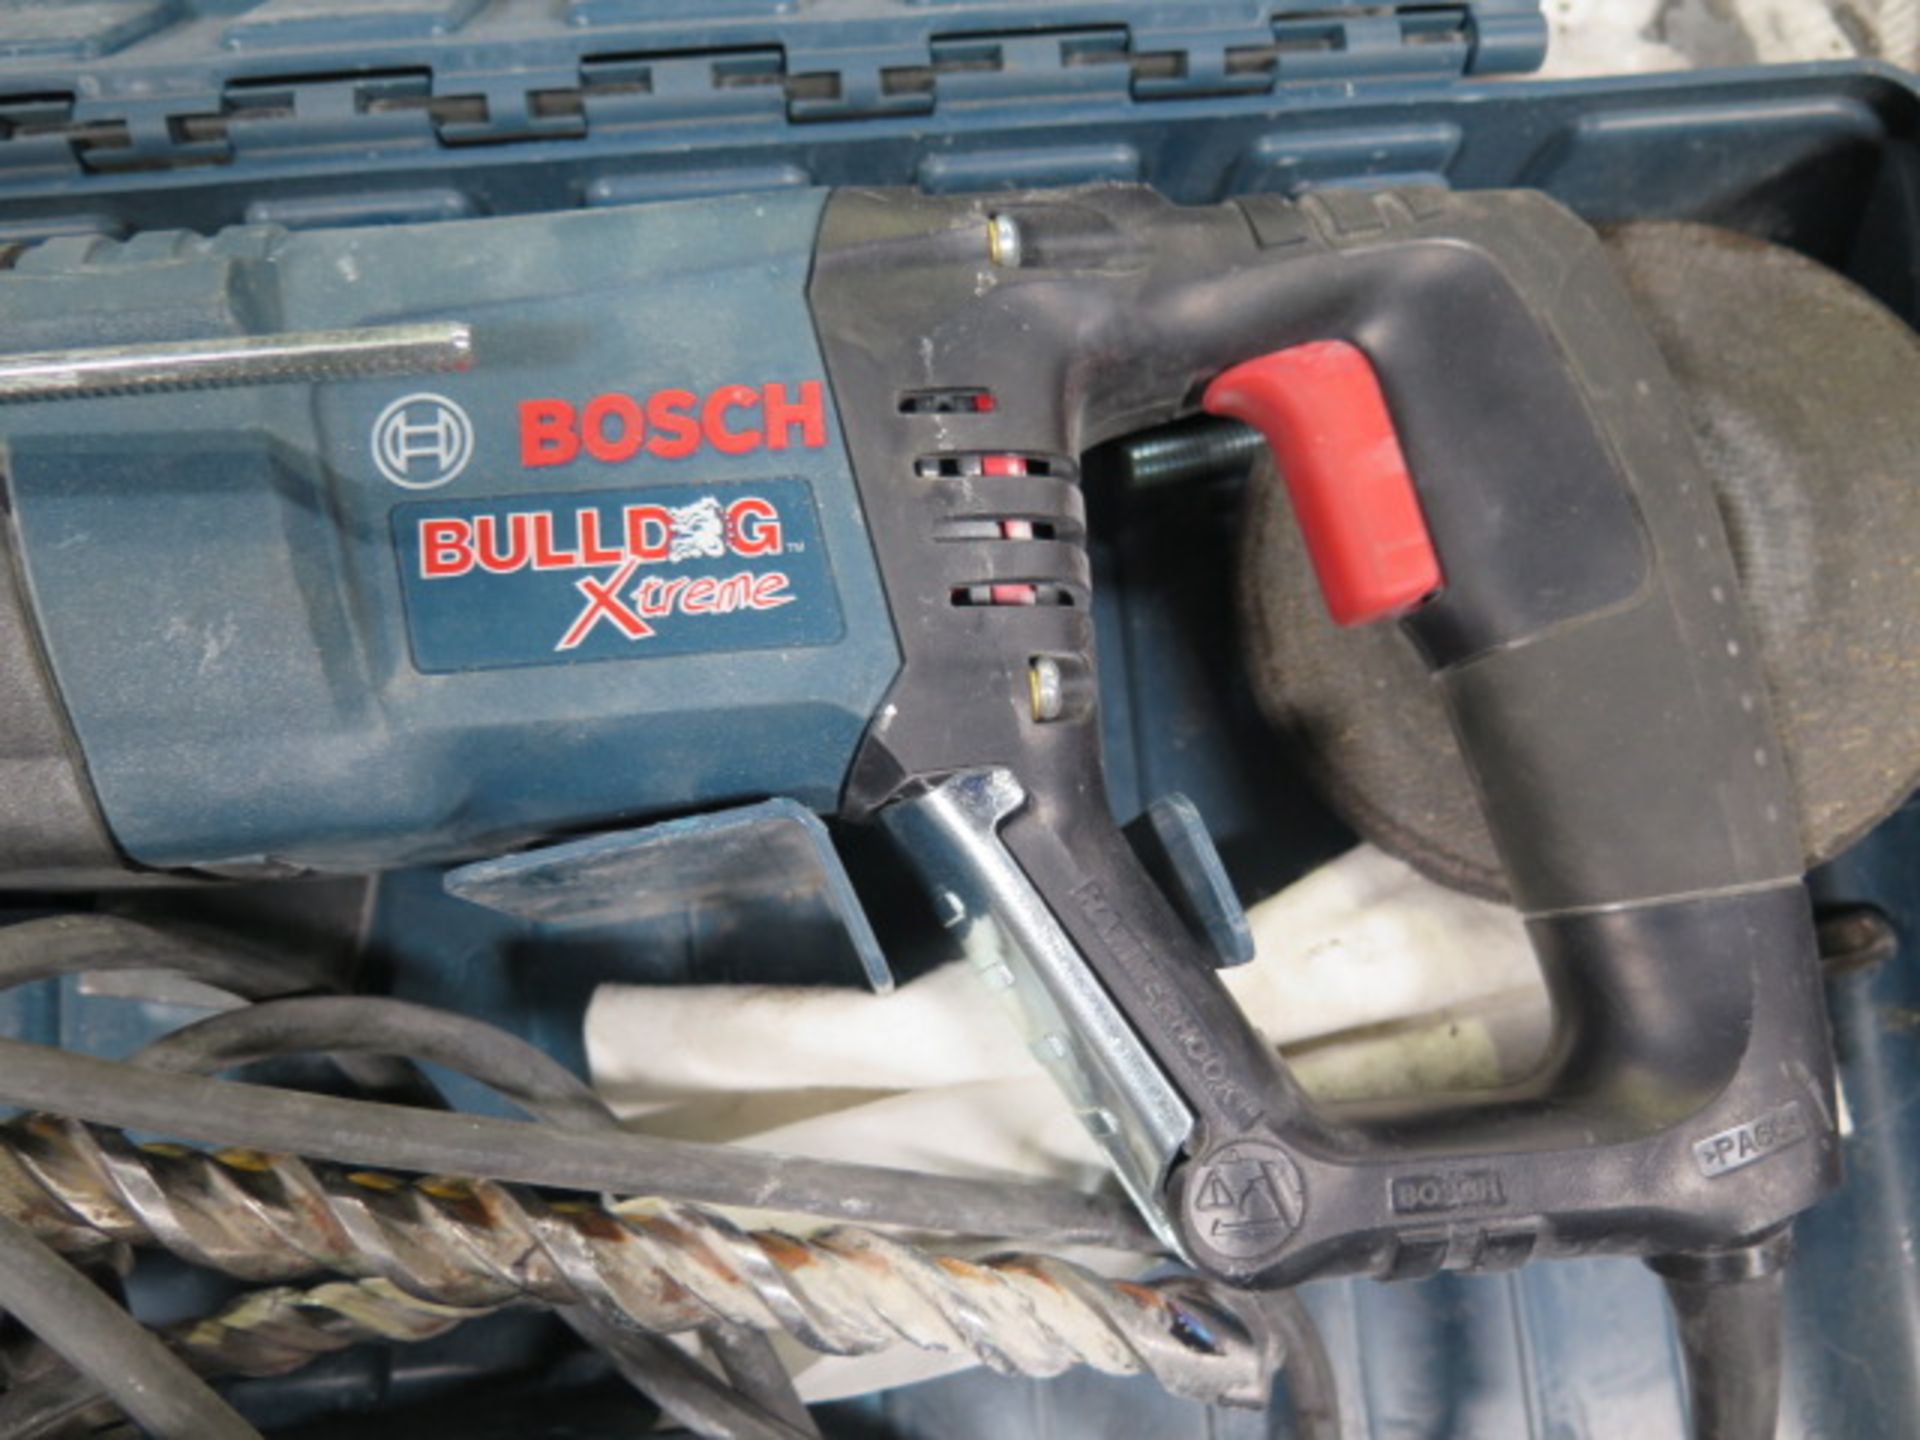 Bosch Bulldog Xtreme Hammer Drill (SOLD AS-IS - NO WARRANTY) - Image 5 of 5